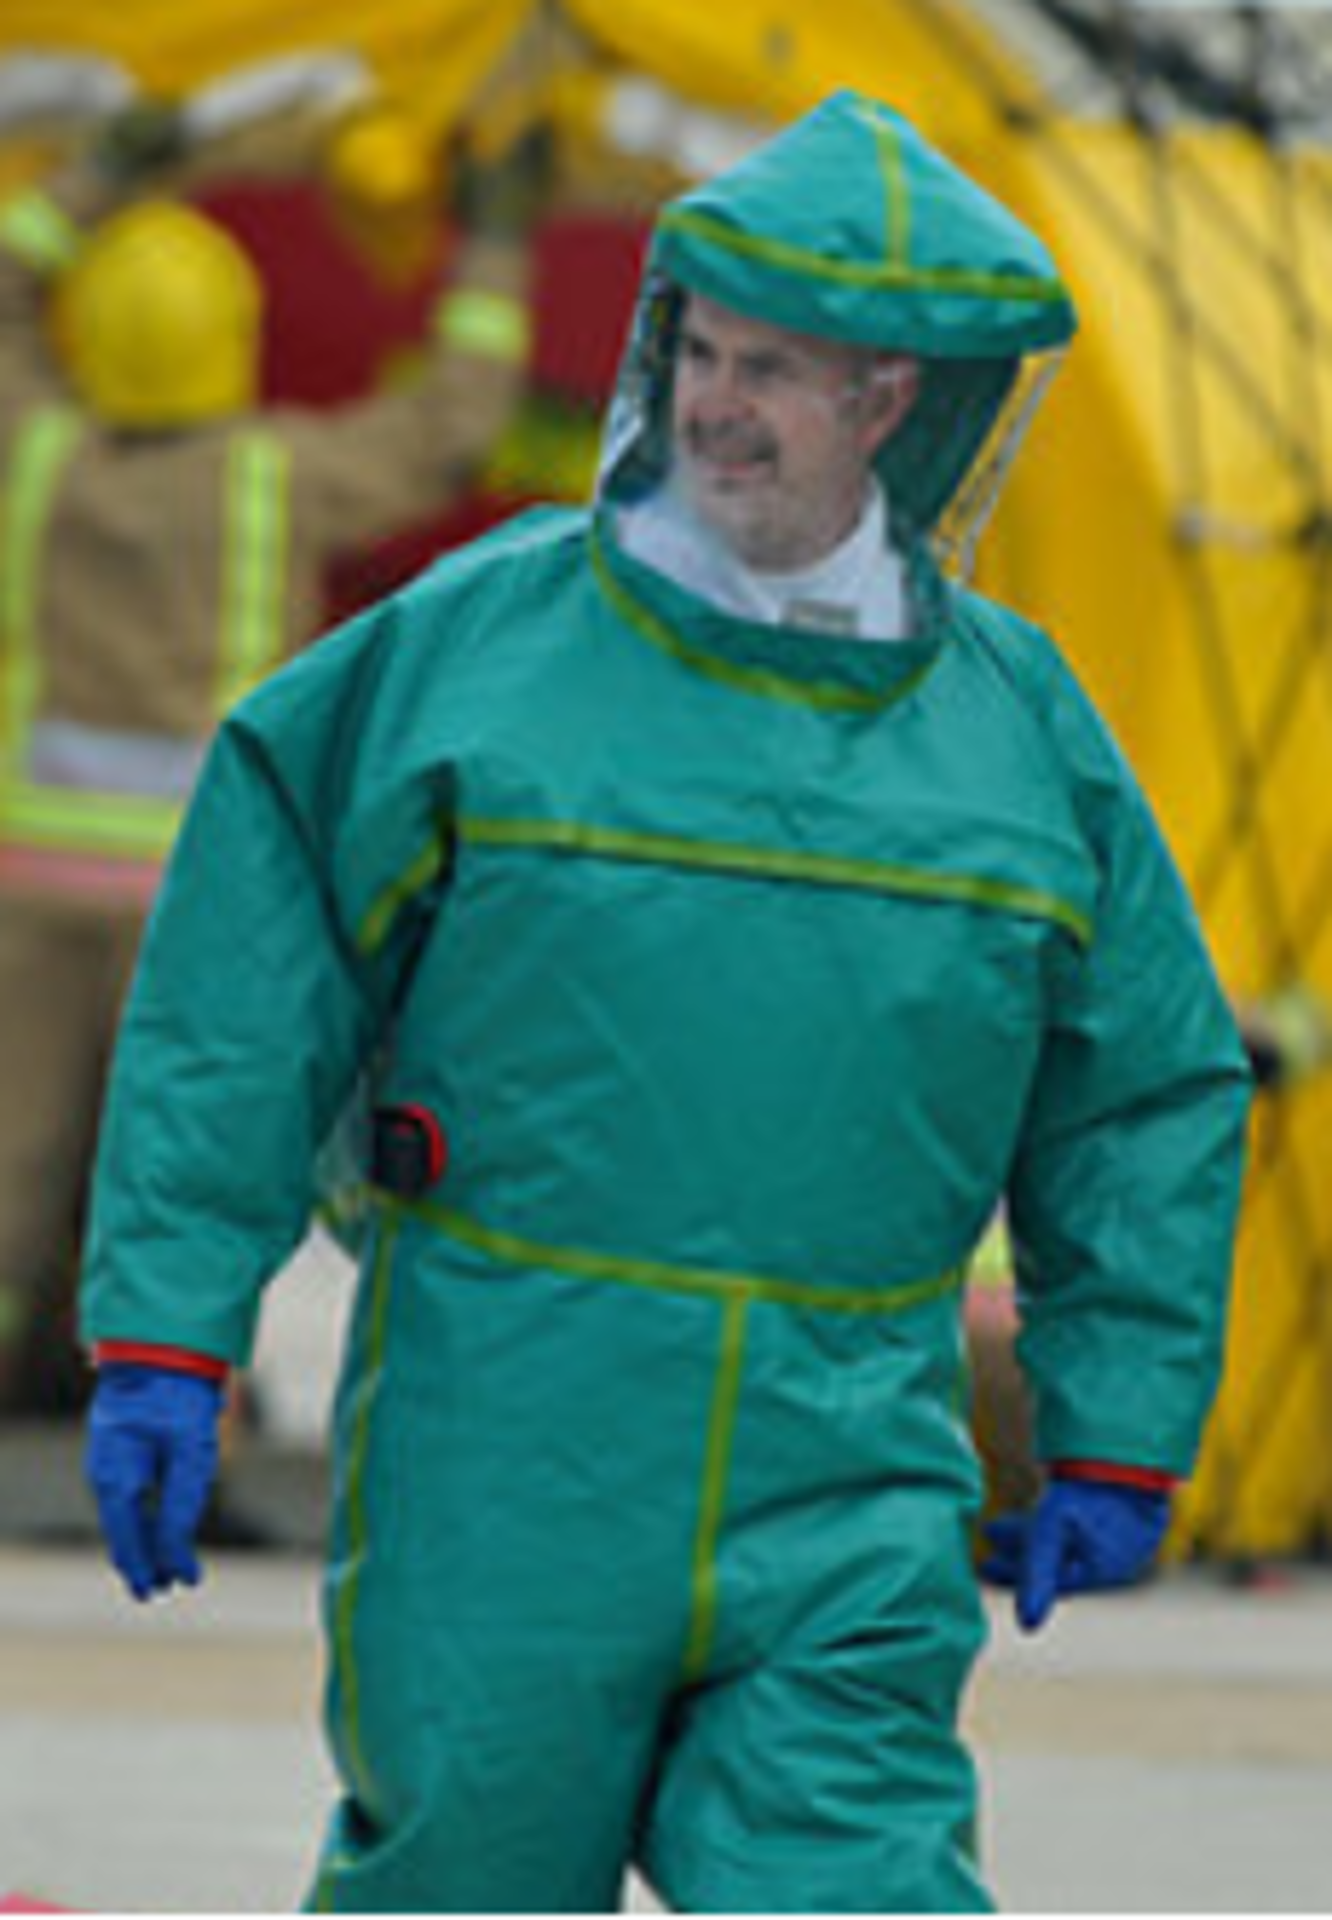 Respirex Respiratory Protective Clothing Training Suit with Attached Boots and Gloves etc